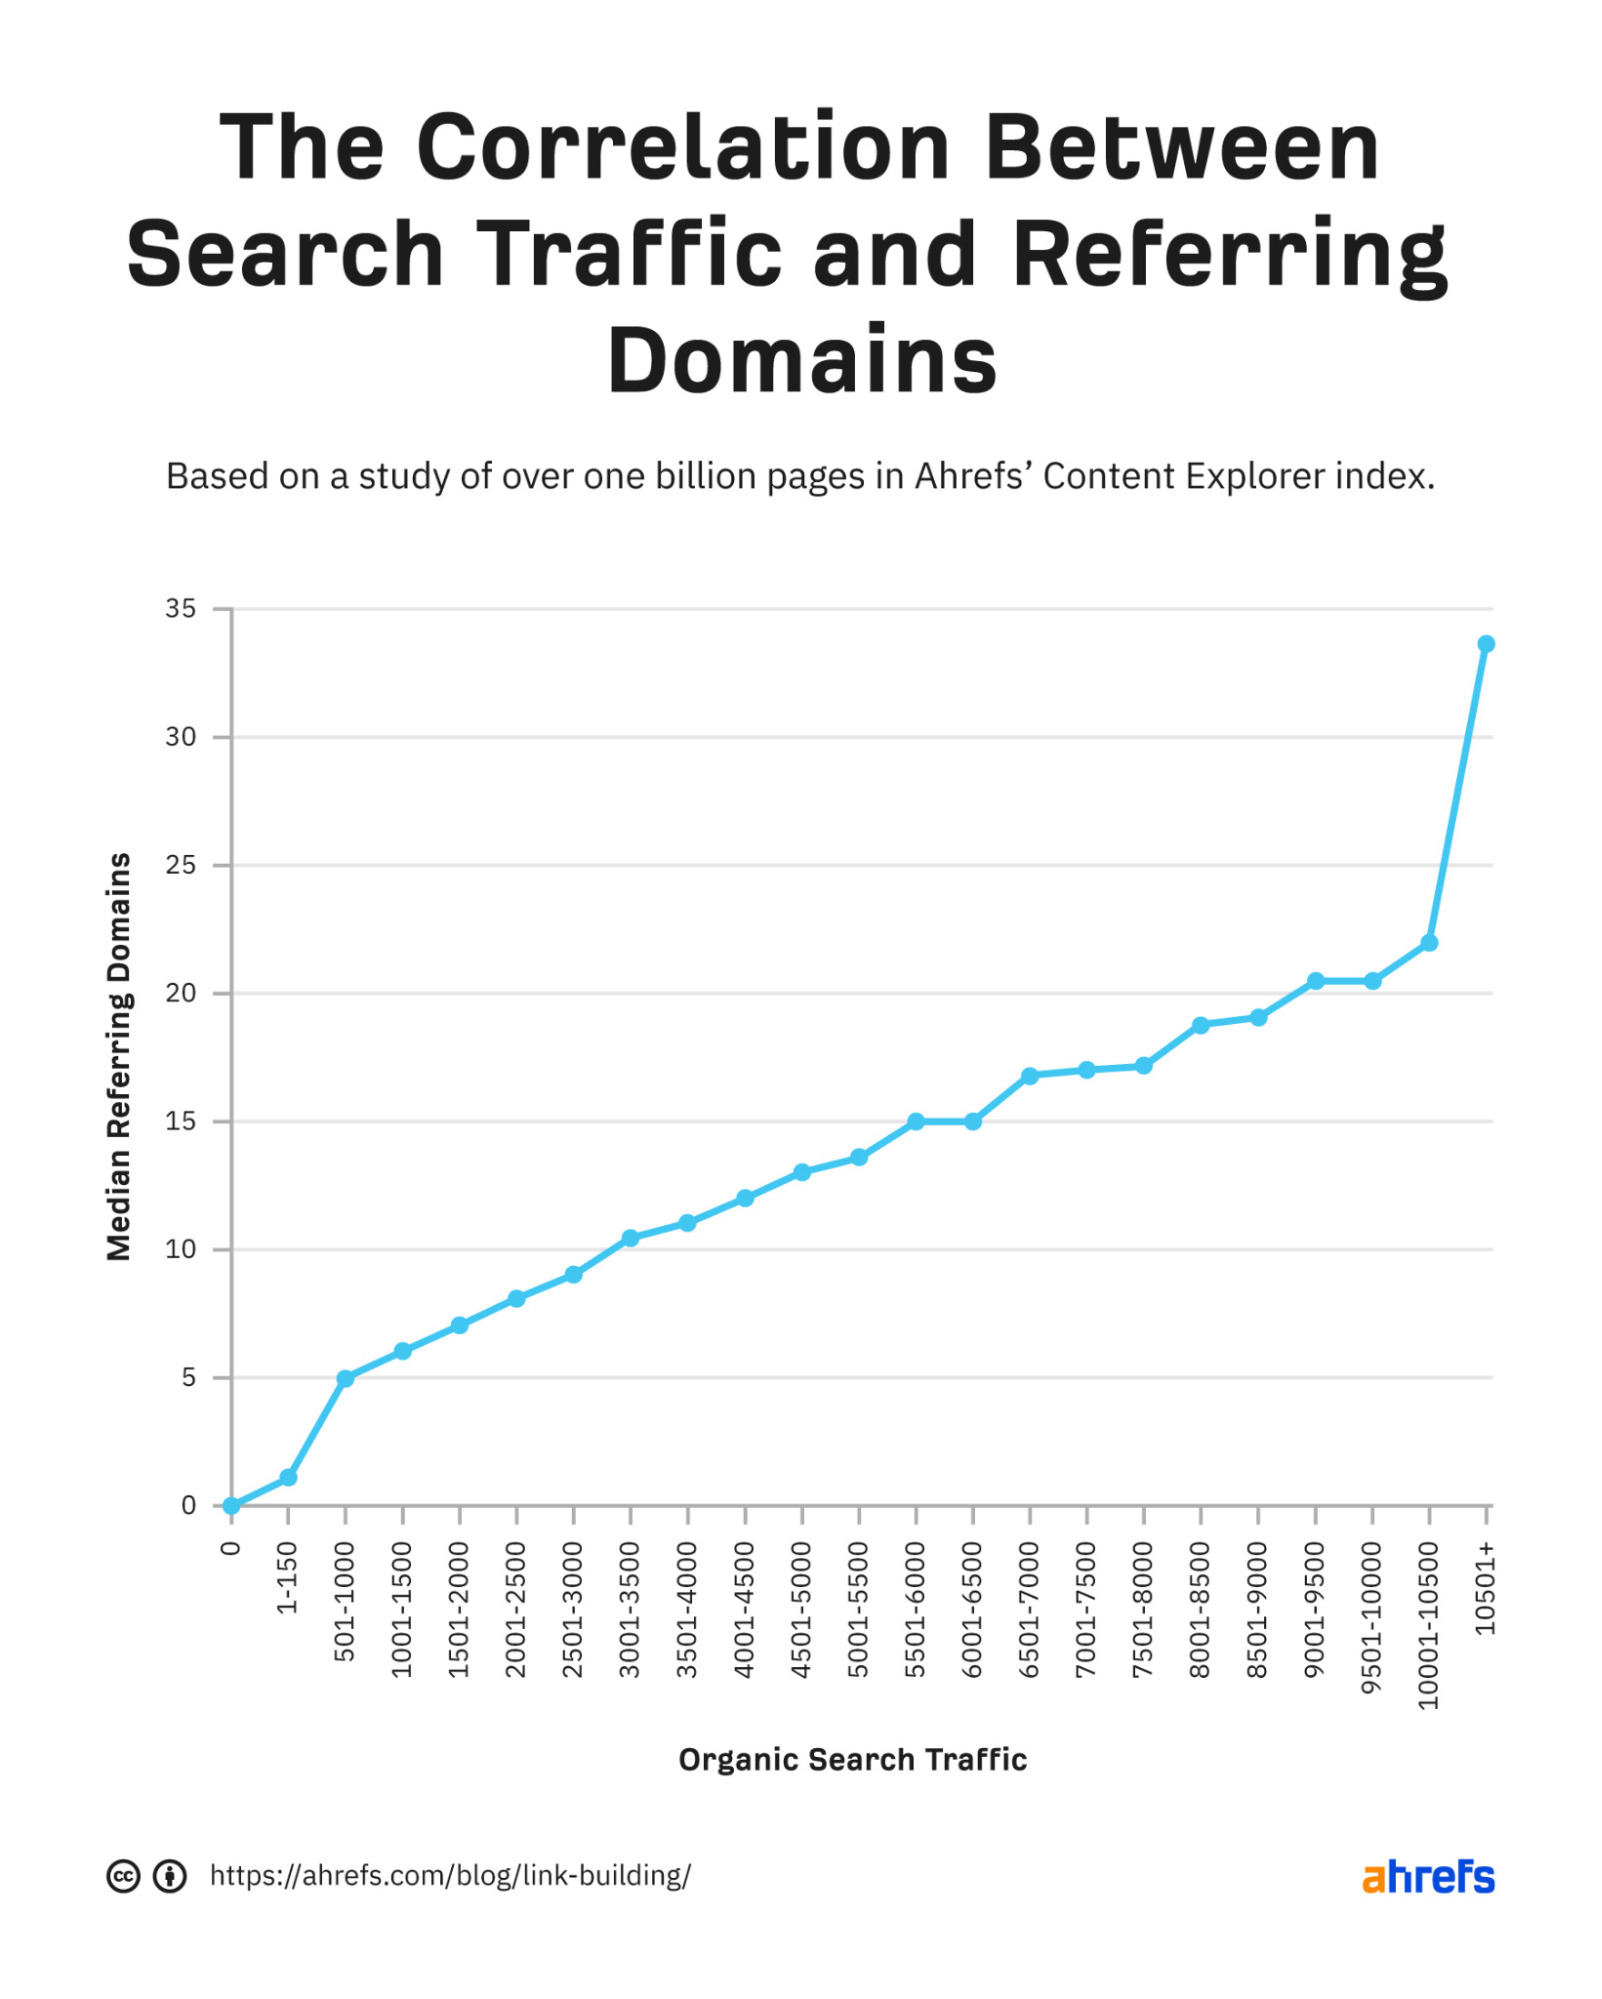 Chart showing the correlation between search traffic and referring domains
